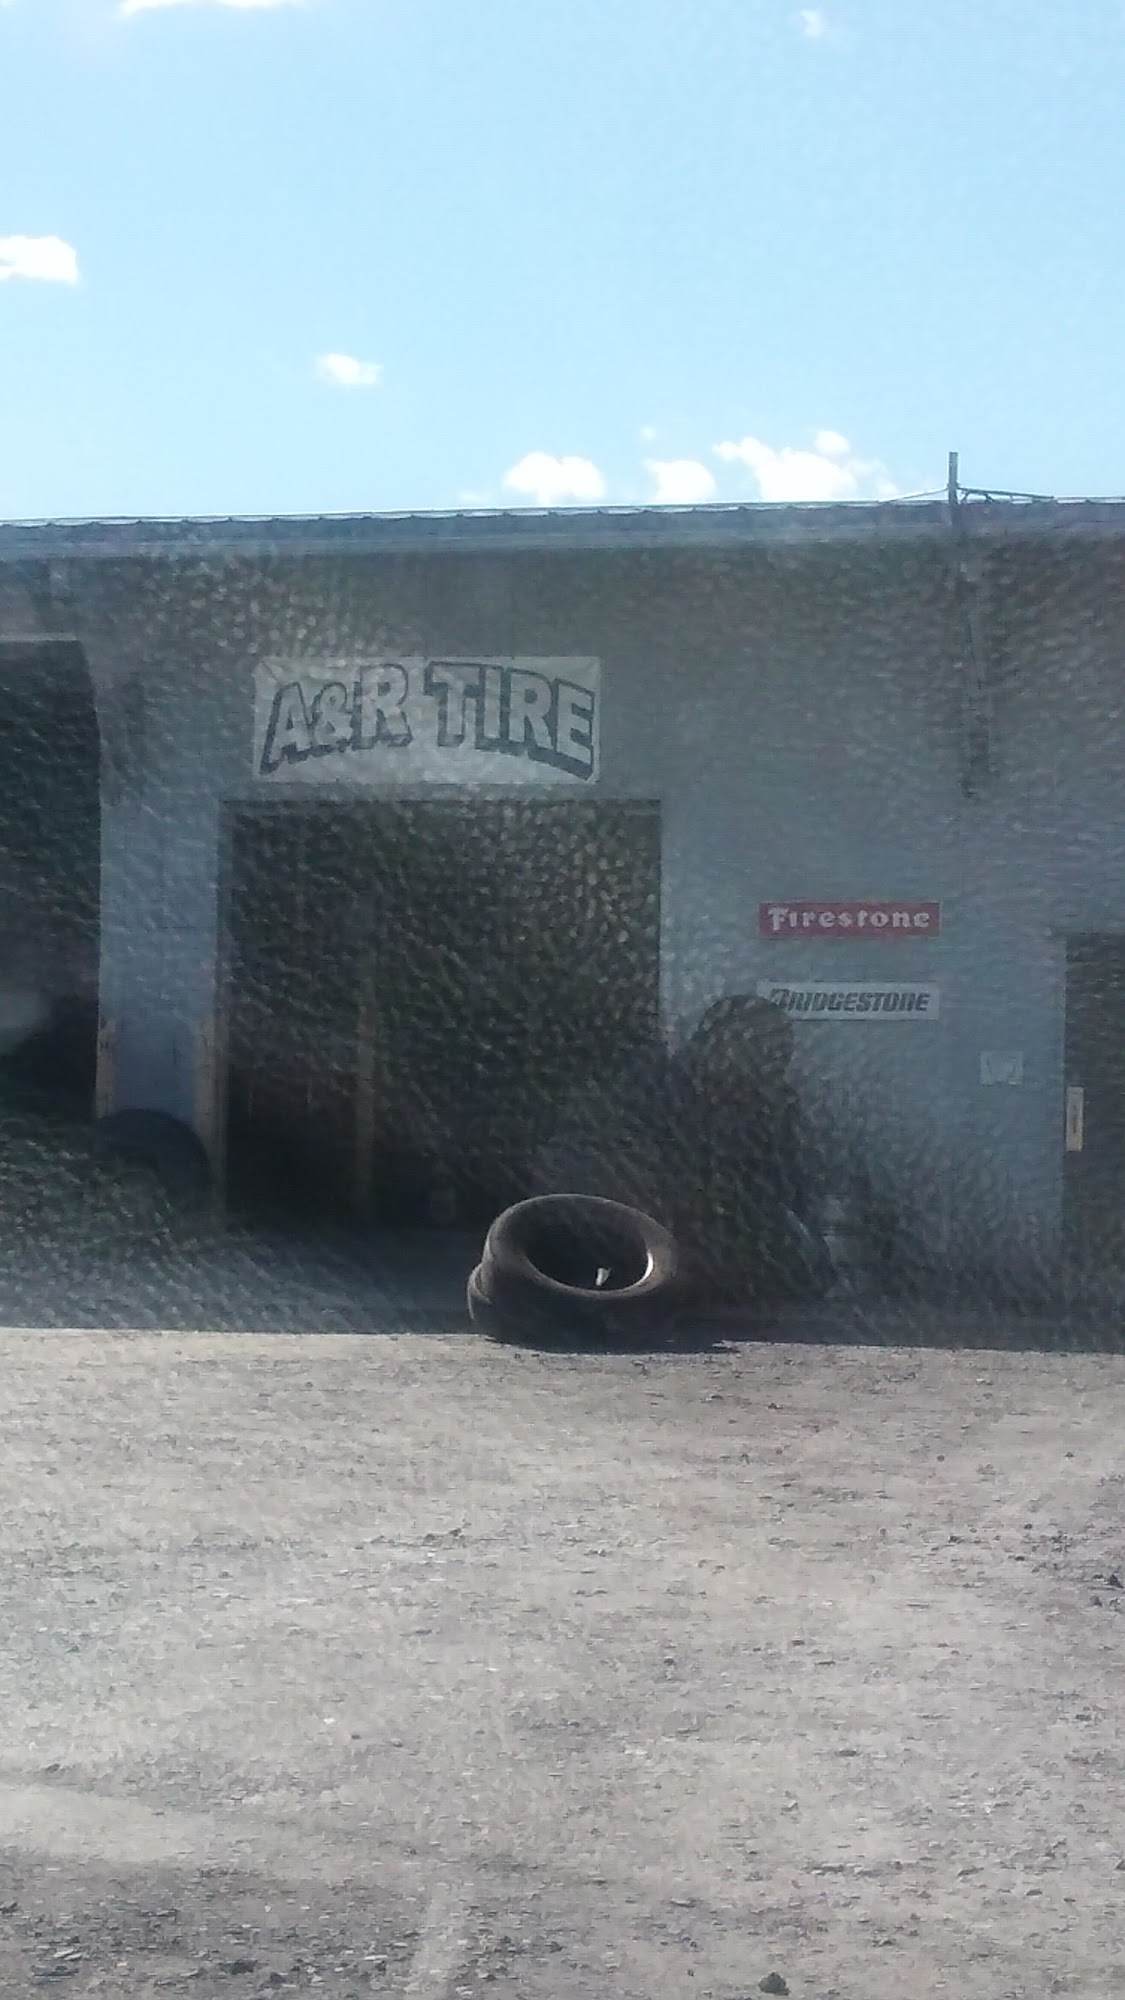 A & R Tire Sales & Recycling Inc.